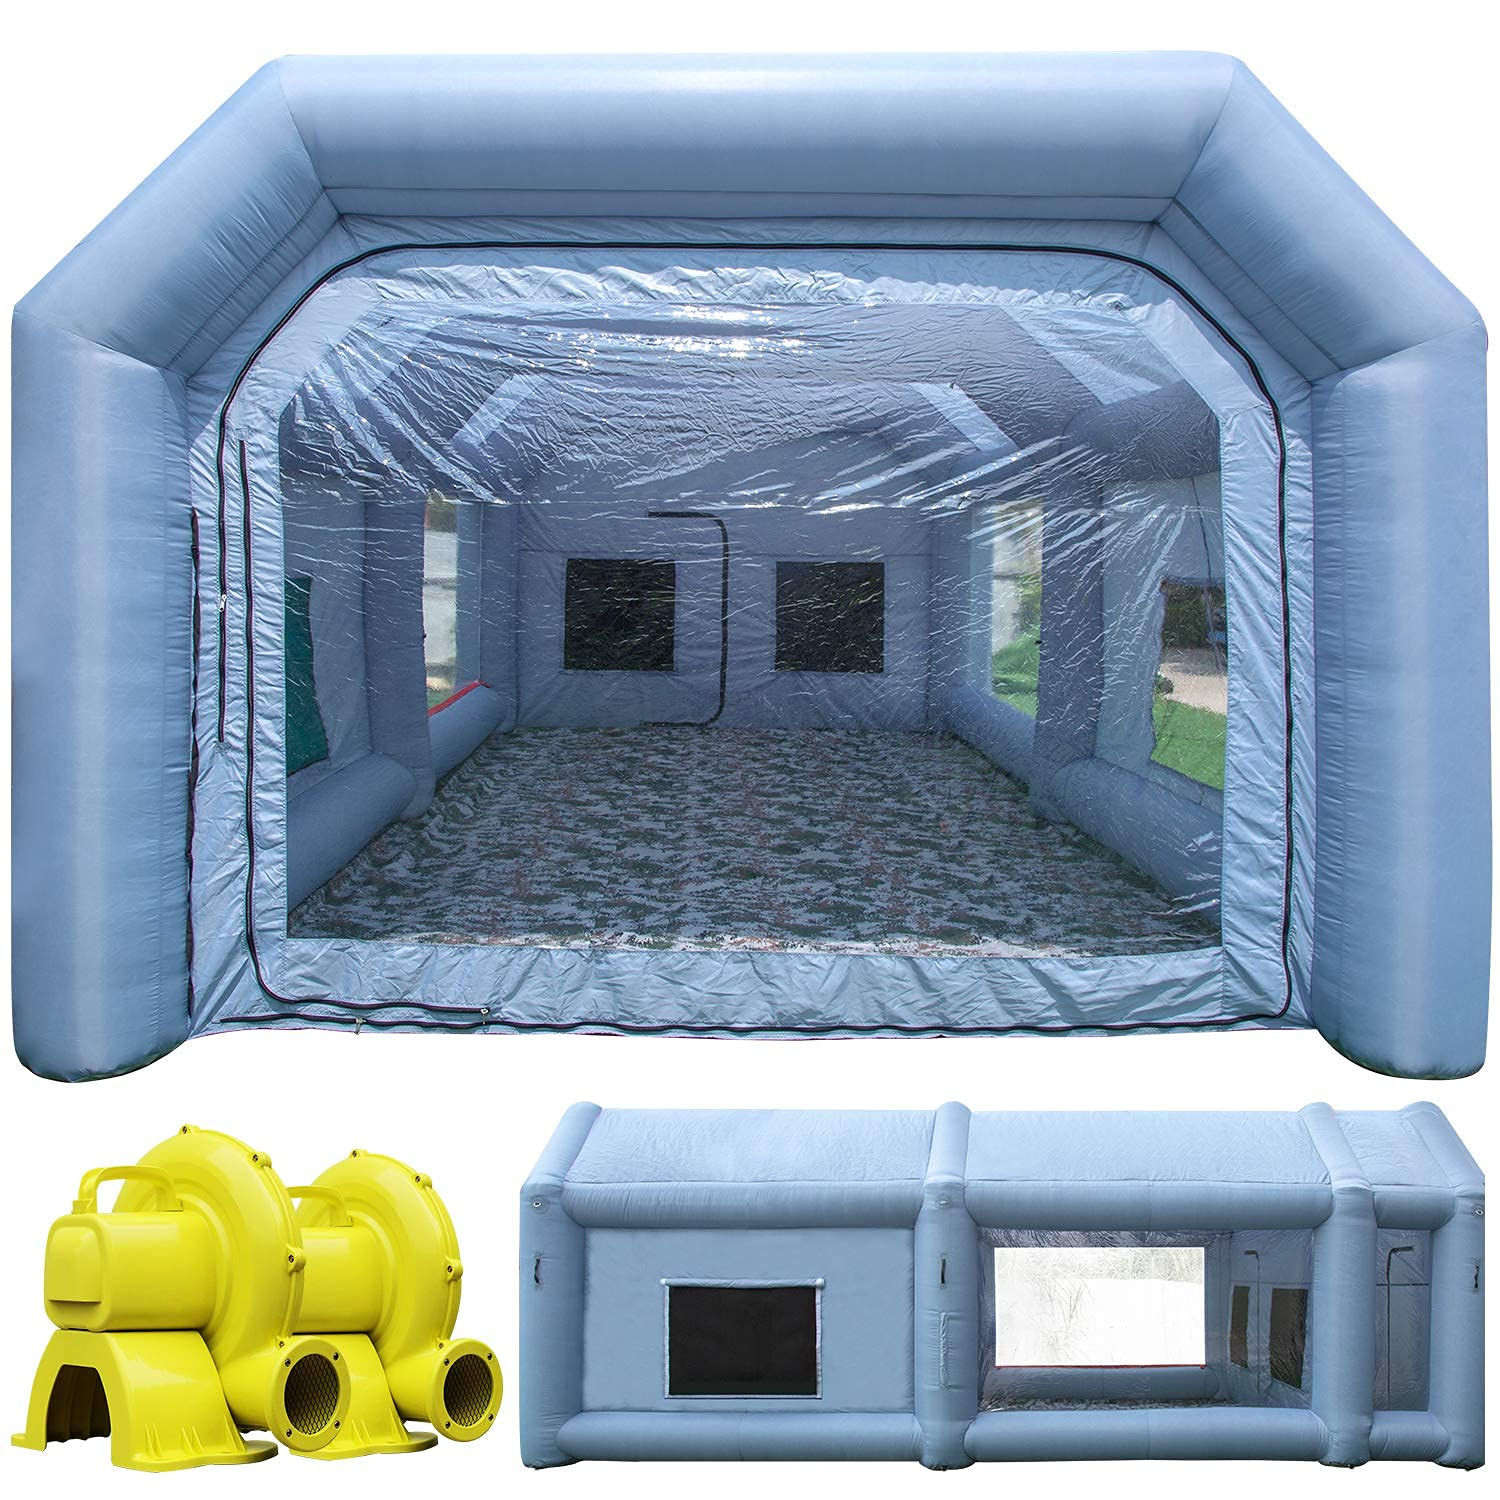 TKLoop Portable Inflatable Paint Booth 26x15x10Ft with 2 Blowers Inflatable Spray Booth with Air Filter System, Blow Up Spray Booth Tent (950W+750W)